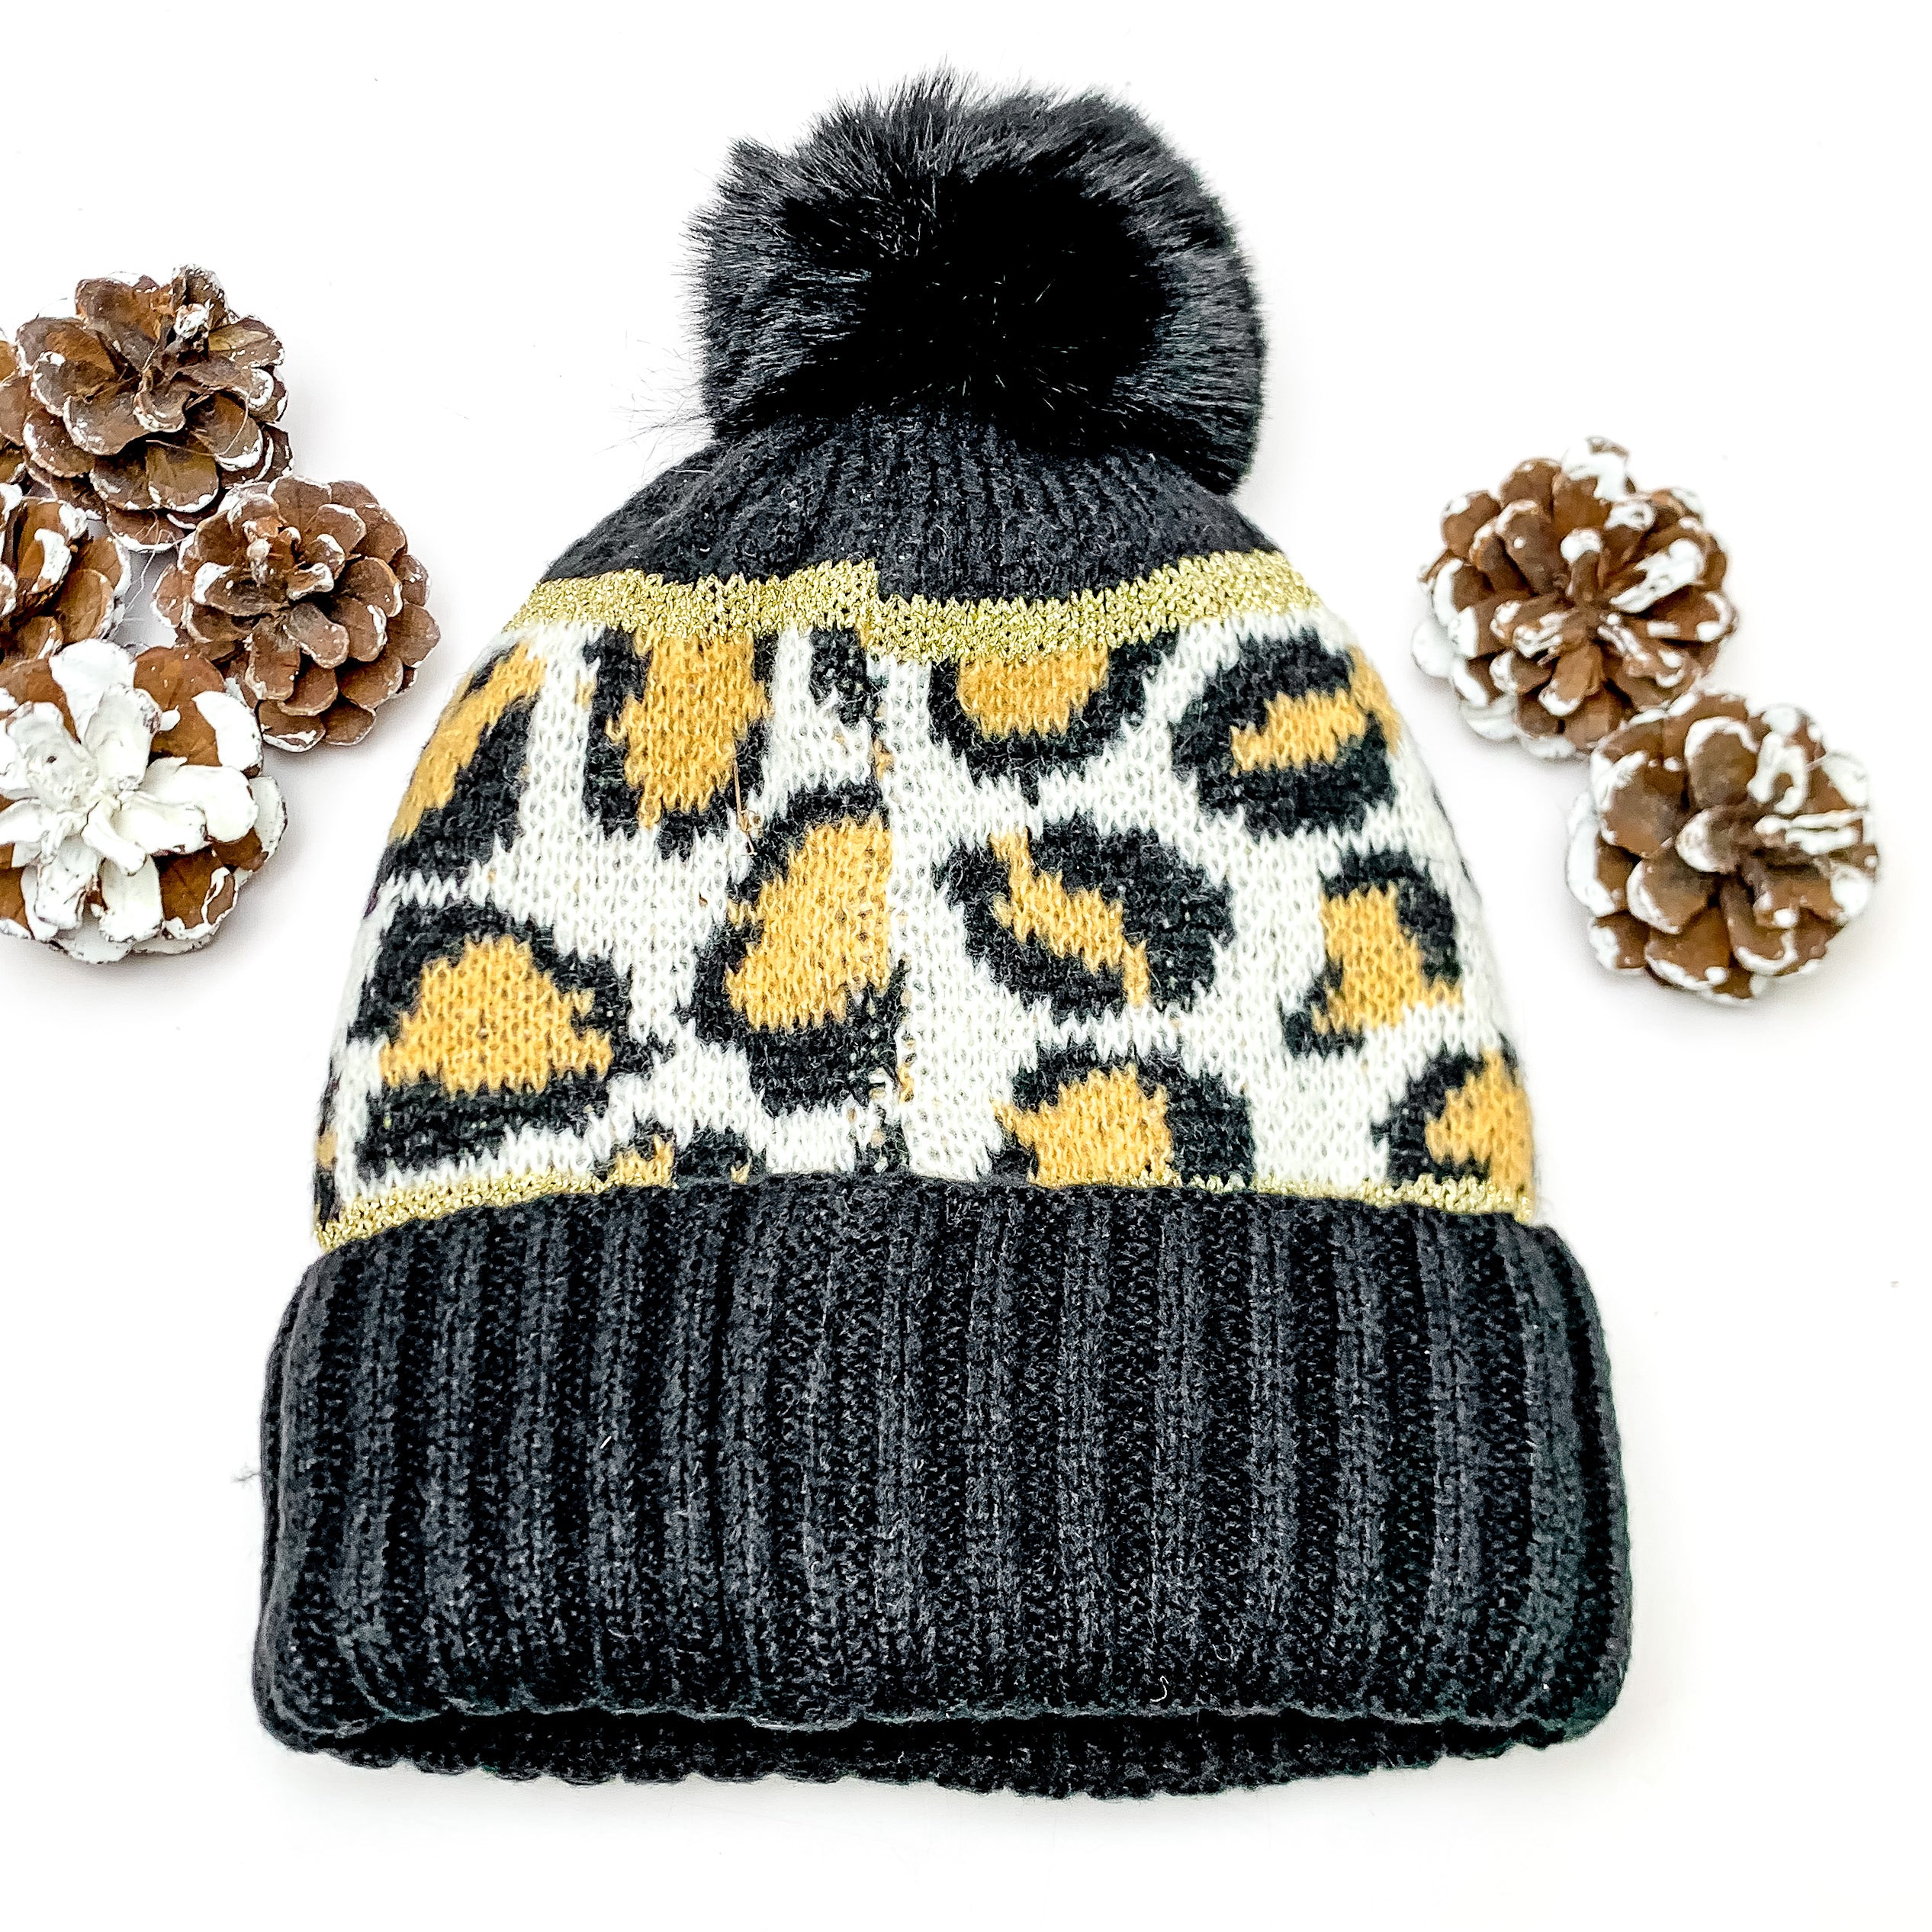 Lucky Leopard Beanie in Black and Brown. This beanie is pictured on a white background with pinecones surrounding it.